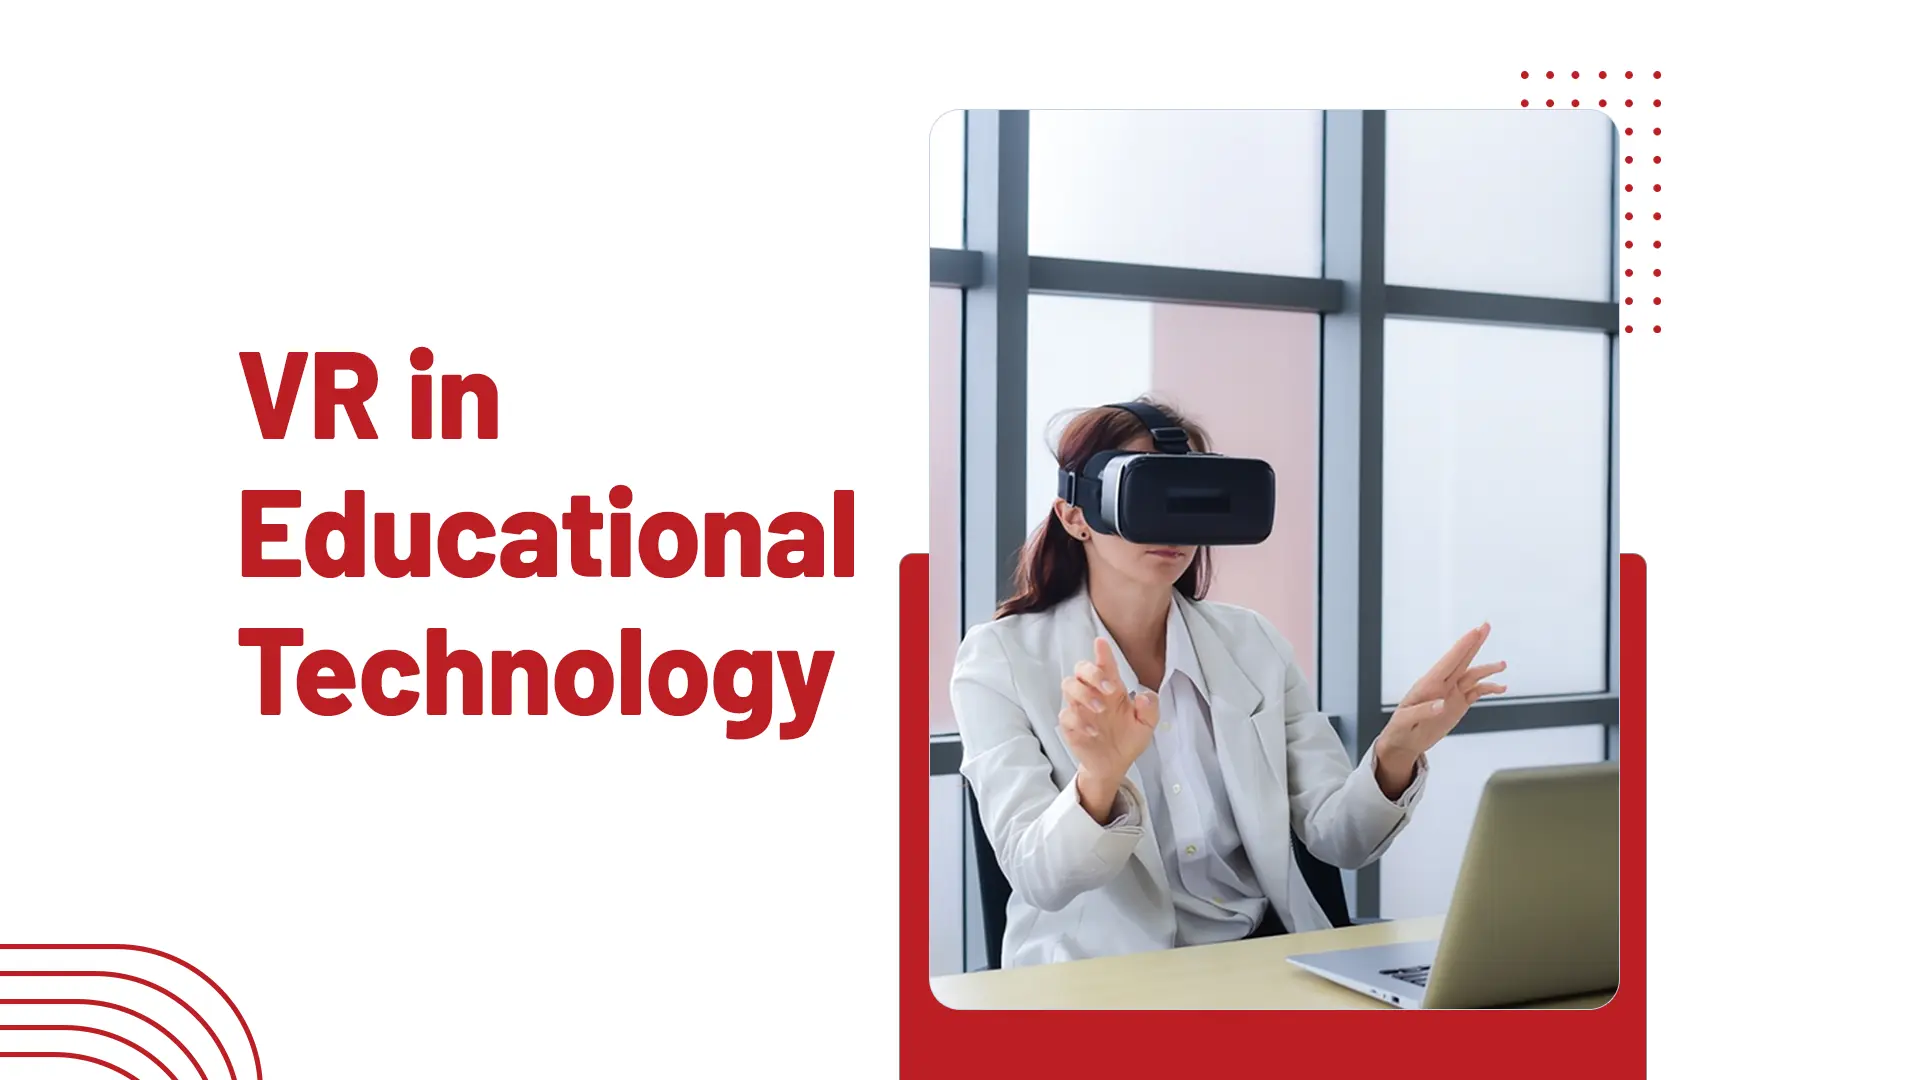 Virtual Reality VR in Educational Technology